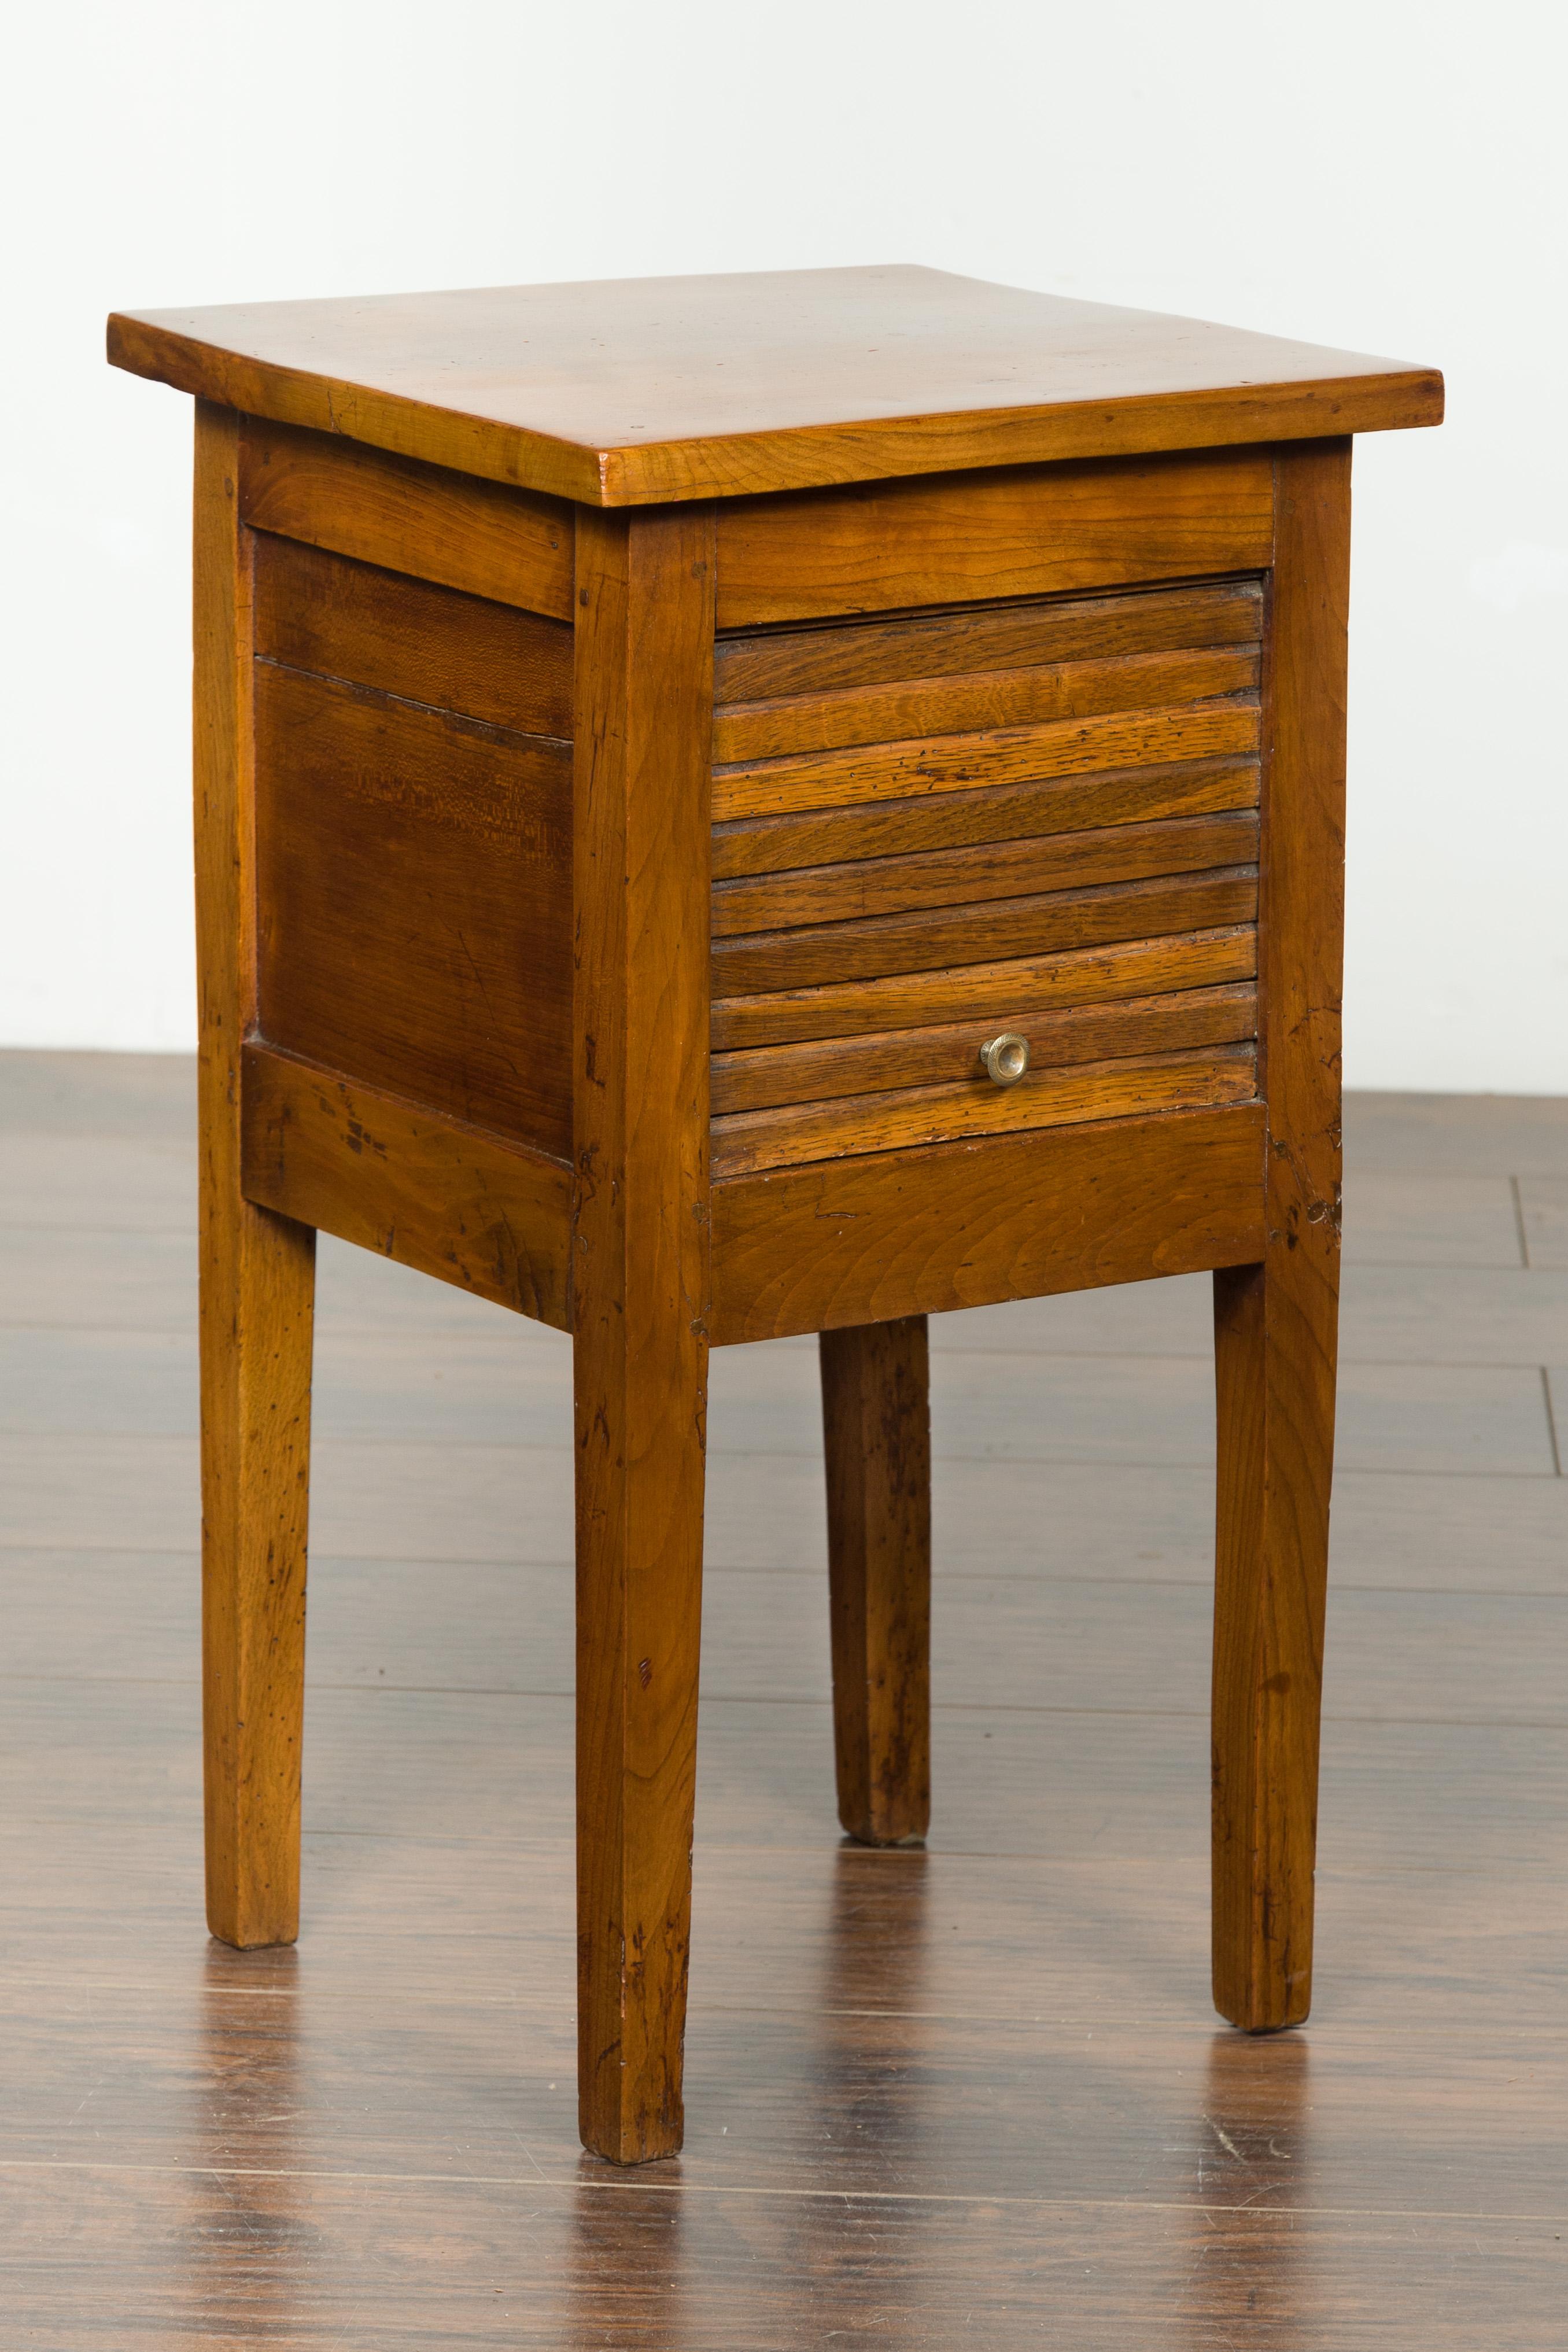 Petite French 1870s Walnut Side Table with Tambour Door and Tapering Legs For Sale 3